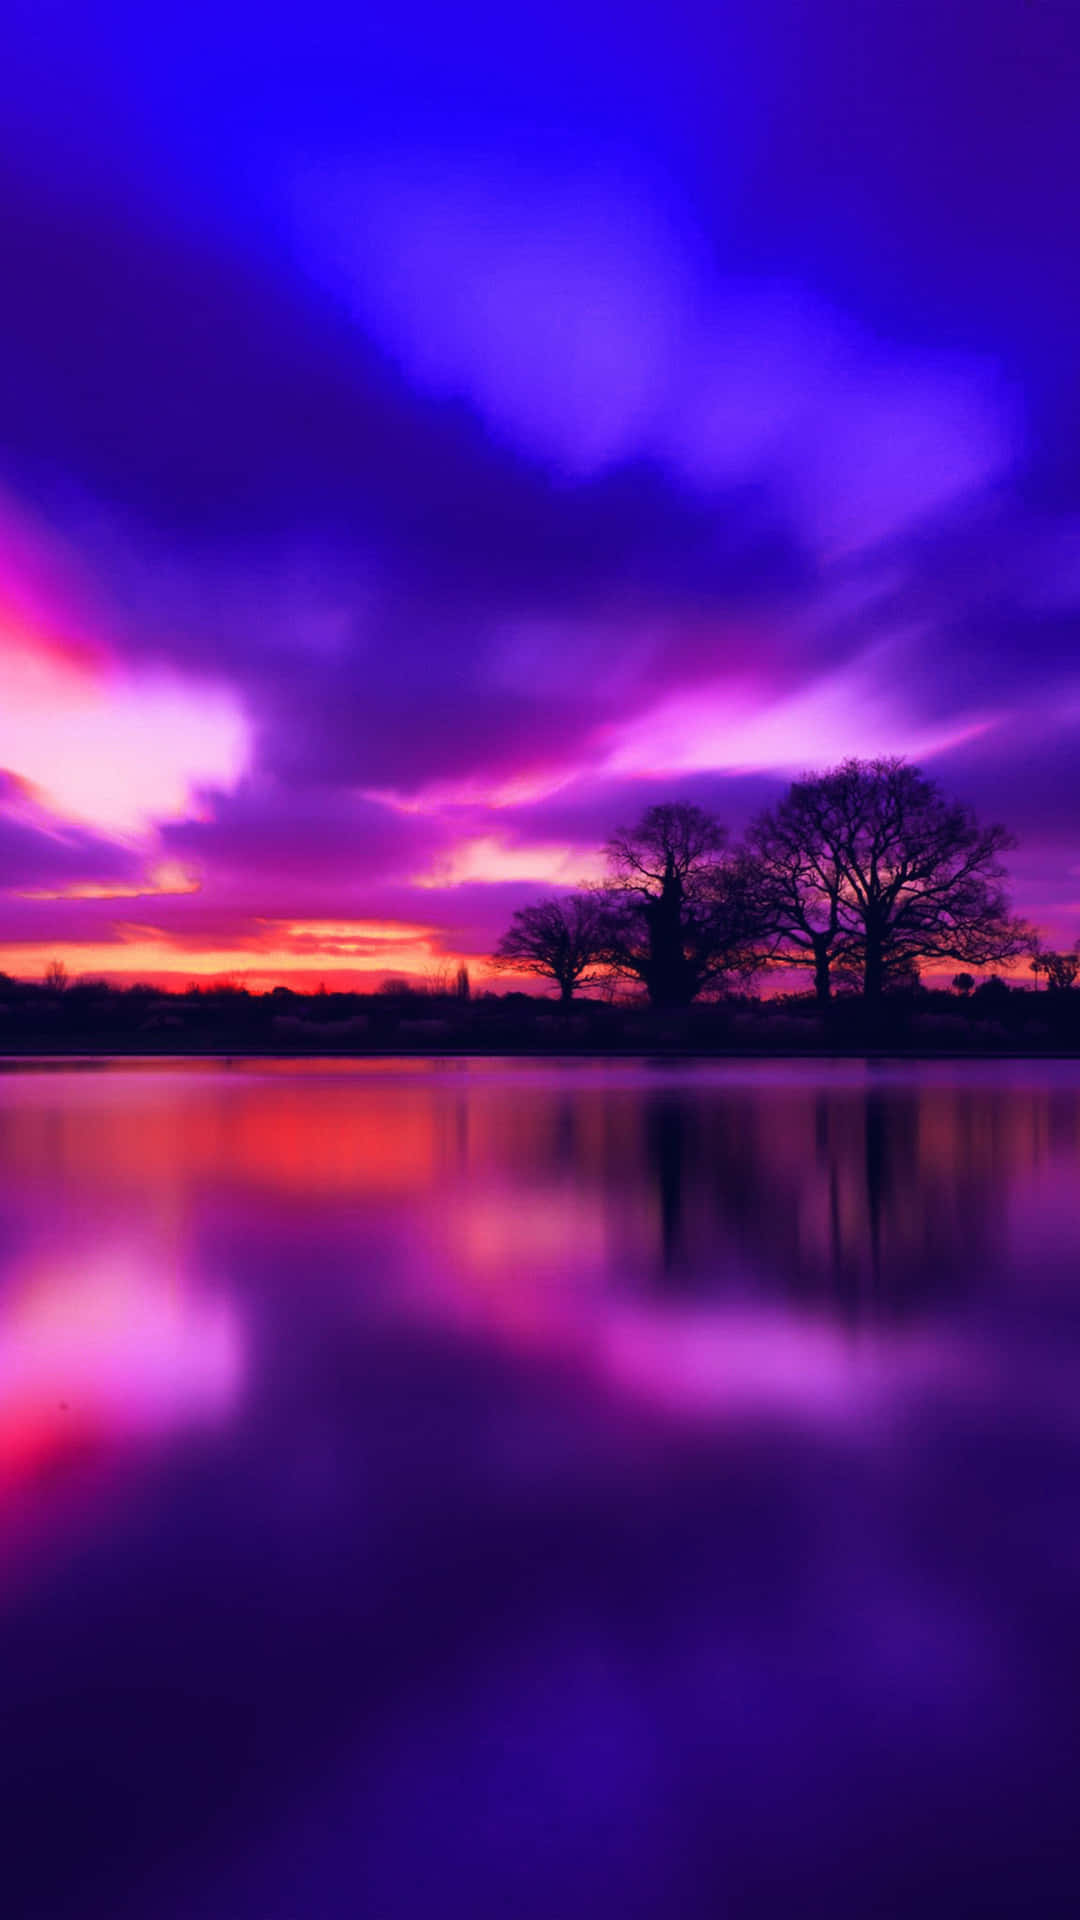 Enjoy the breathtaking view of a blue and purple sunset. Wallpaper